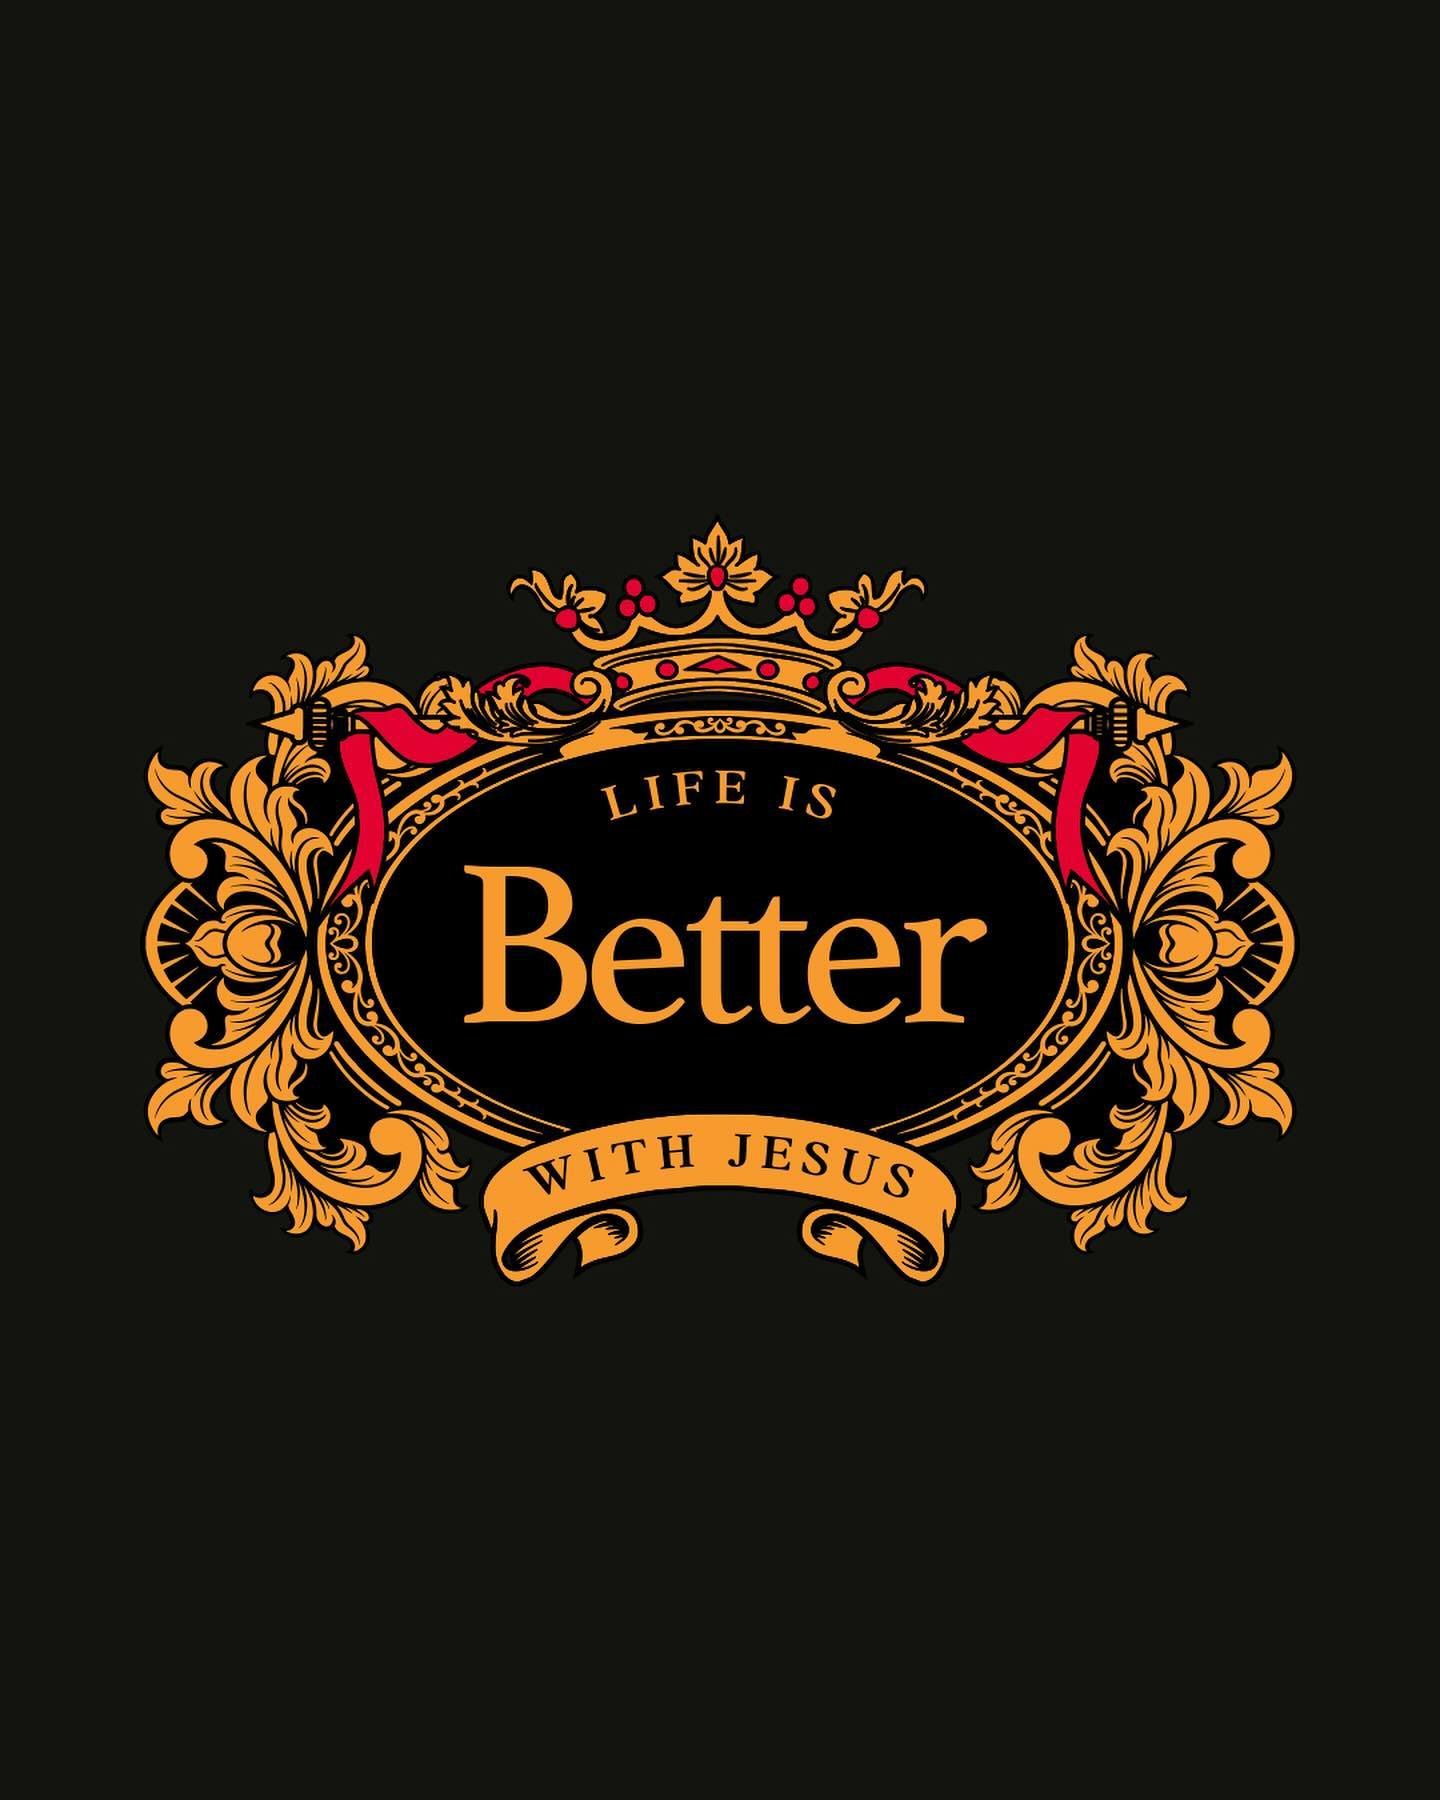 Life is Better With Jesus

This design is available for purchase ⚡️

Includes: 
Commercial Rights
Source File
PNG, EPS &amp; JPEG formats

DM if interested!

#merchandise #merchdesigner #christianquotes #minimalist #thrifted #encouraging #merchdesign